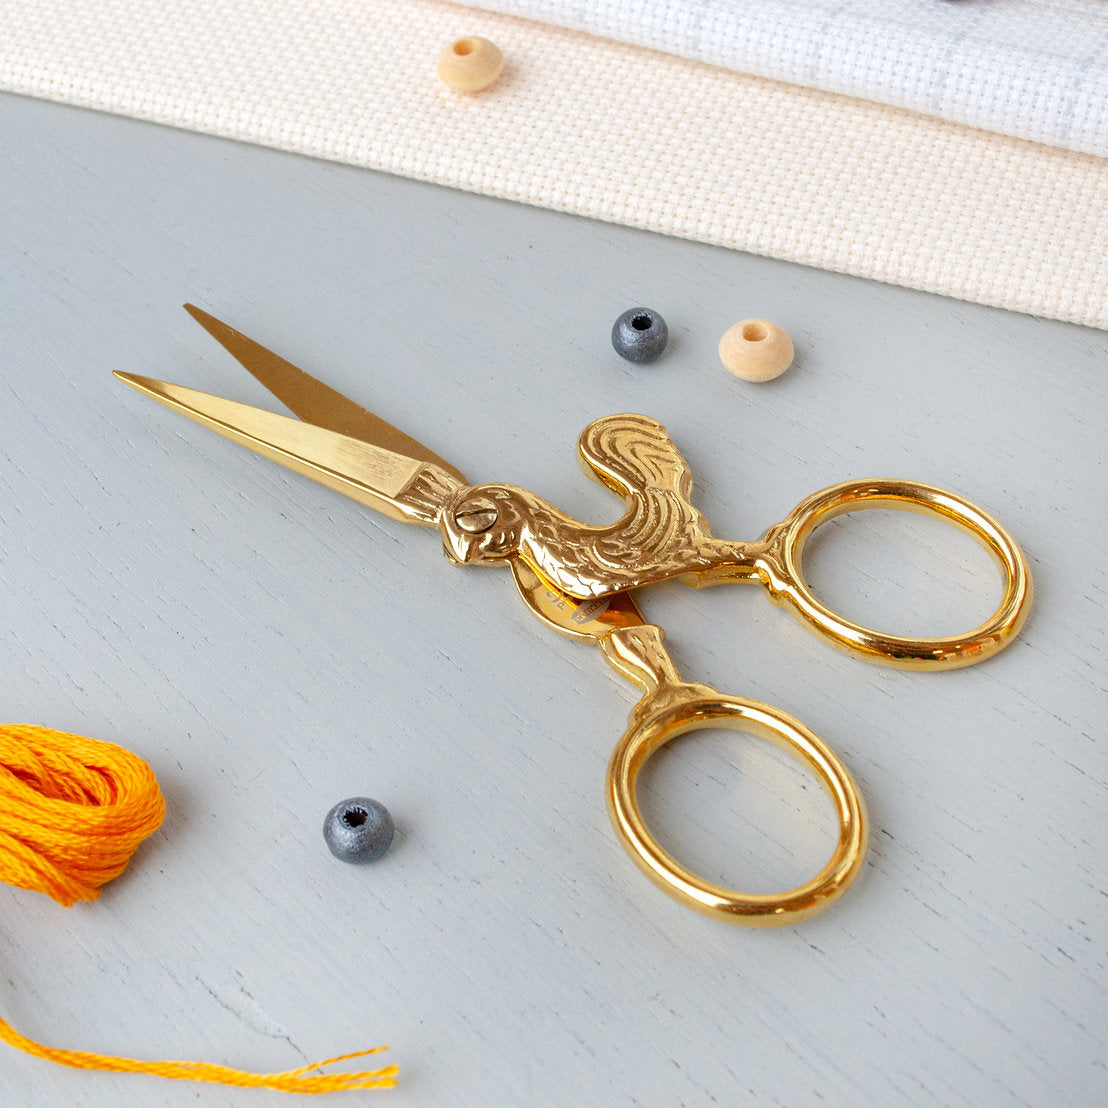 Cross stitch scissors 24K GOLD Collection 9.5 cm by Premax 10359: Luxury and Precision for your Embroidery Projects